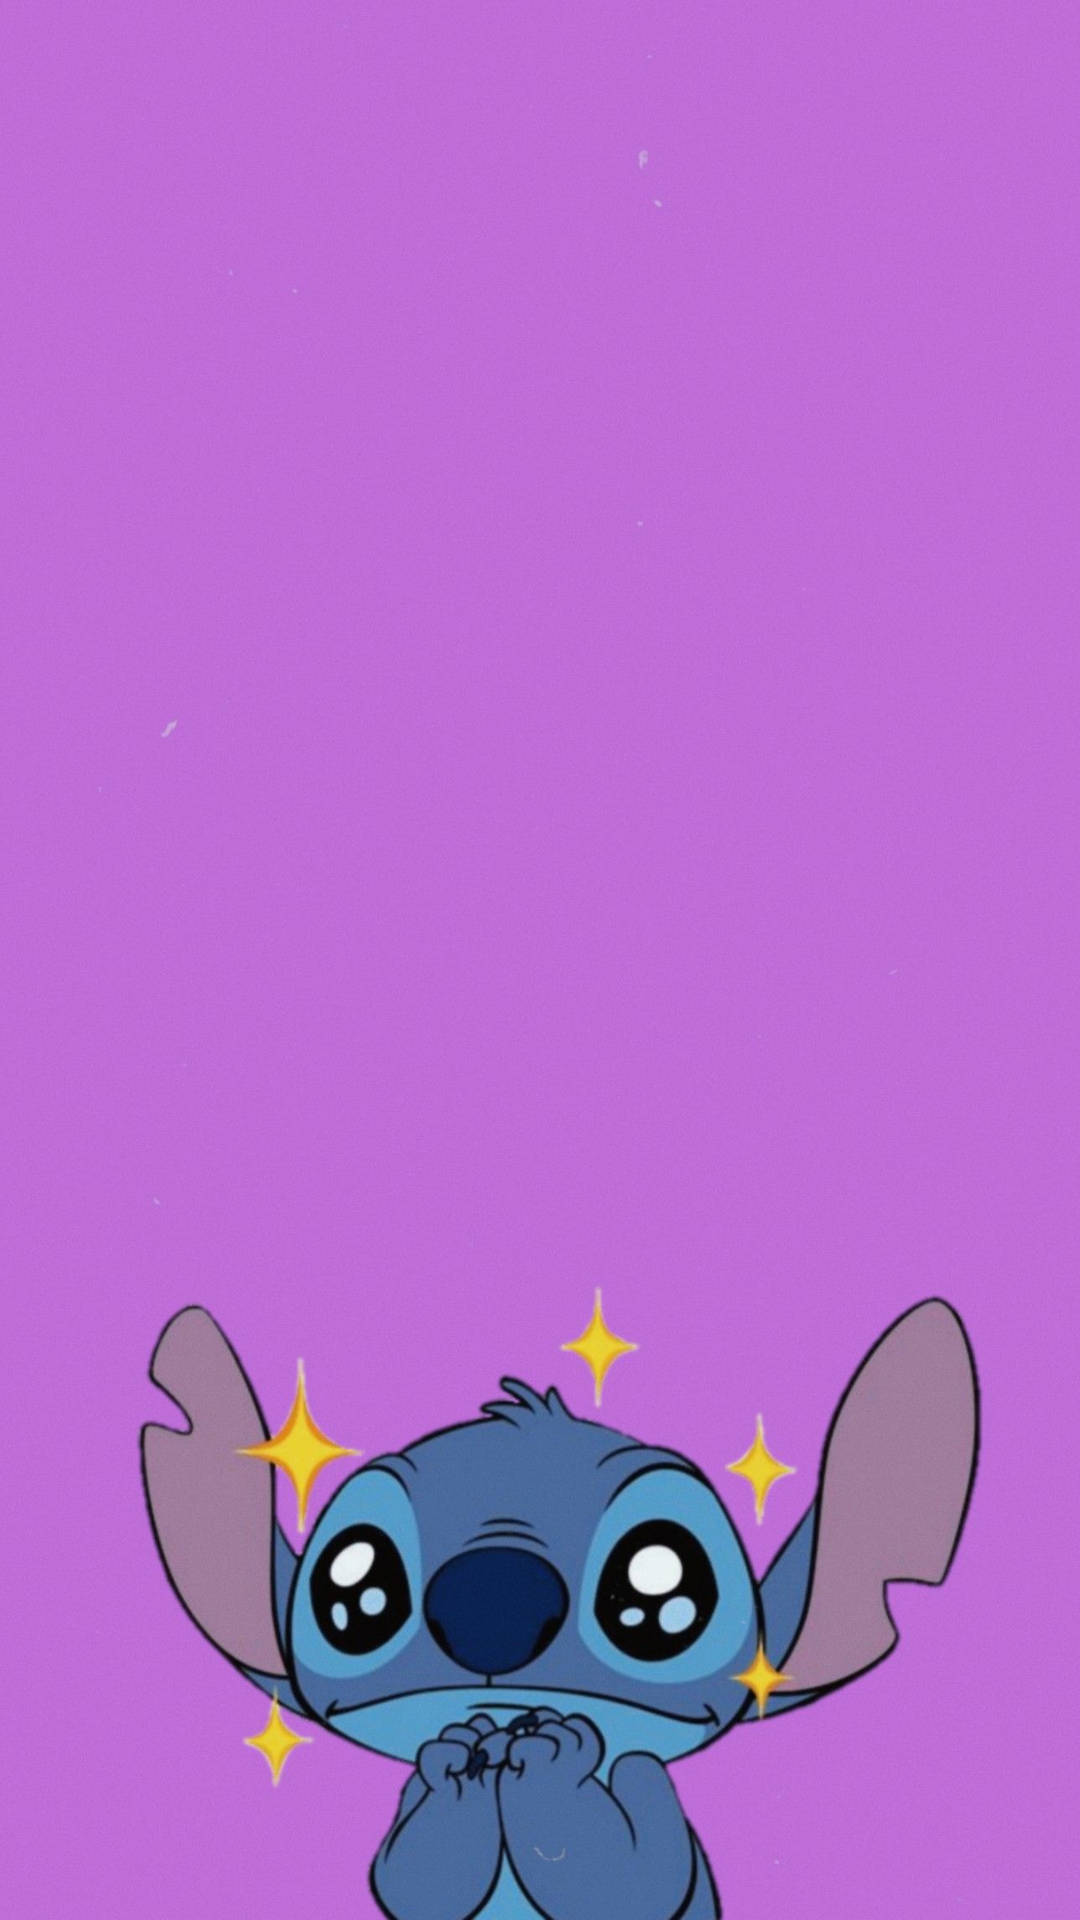 Download Cute Disney Stitch Looking Amazed Wallpaper | Wallpapers.com